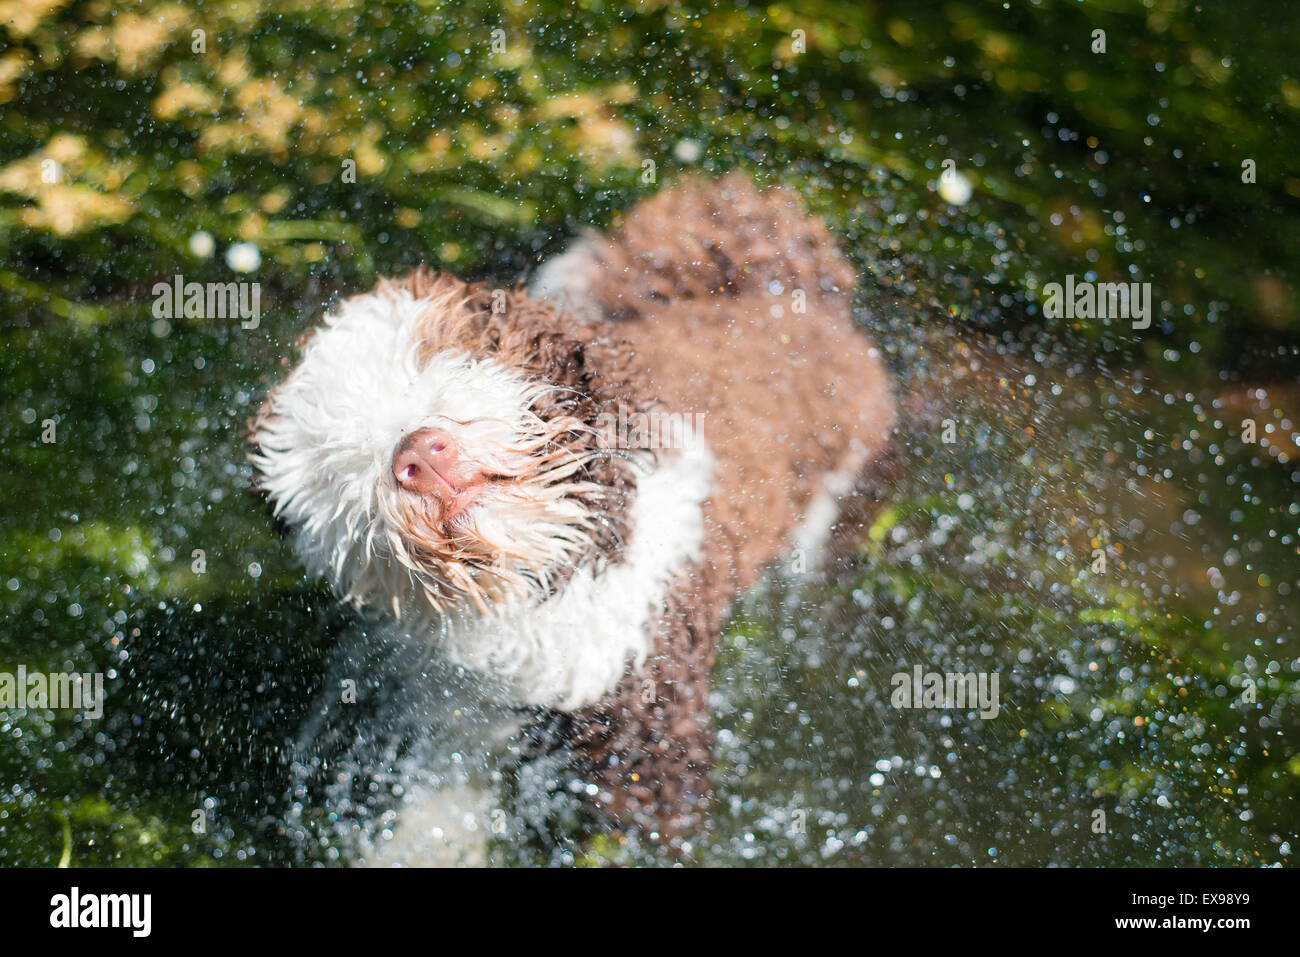 Spanish water dog shaking off water in river Stock Photo